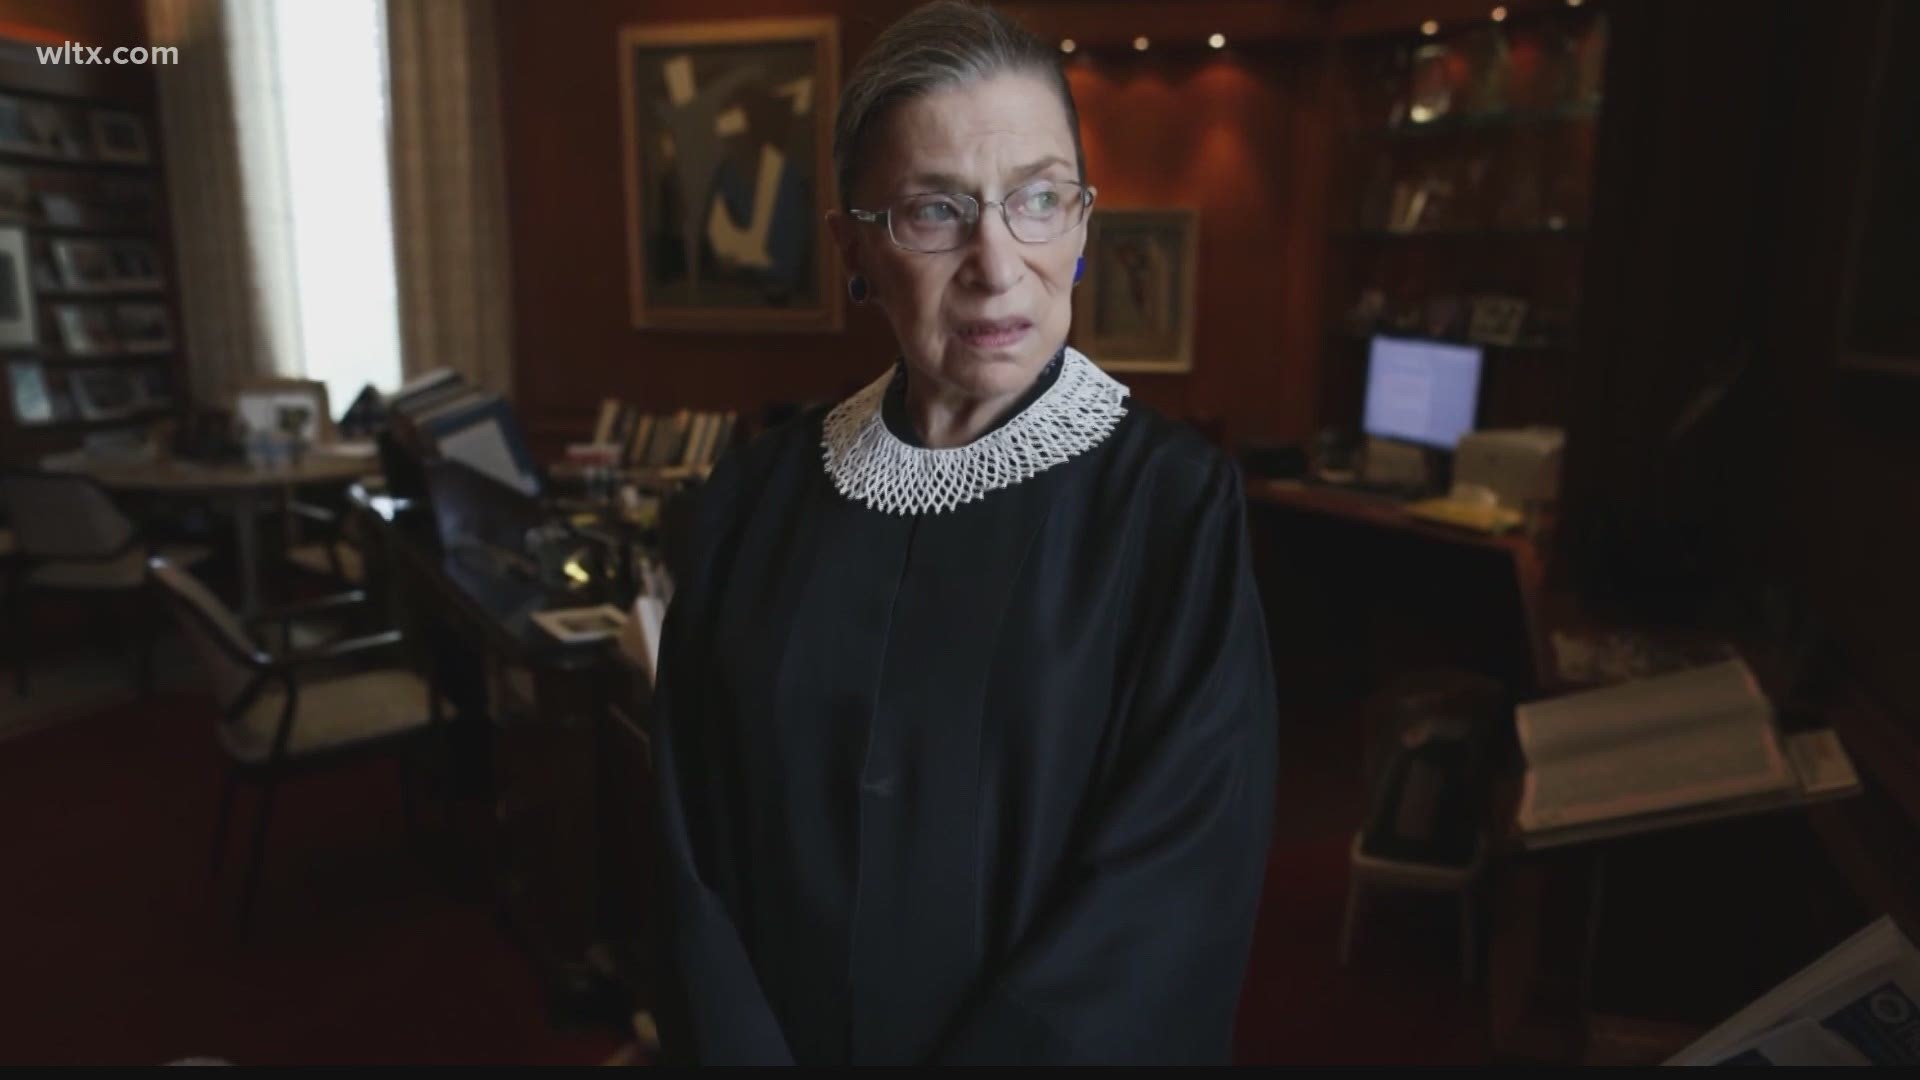 Ruth Bader Ginsburg died last week, leaving a long and important legal legacy behind.